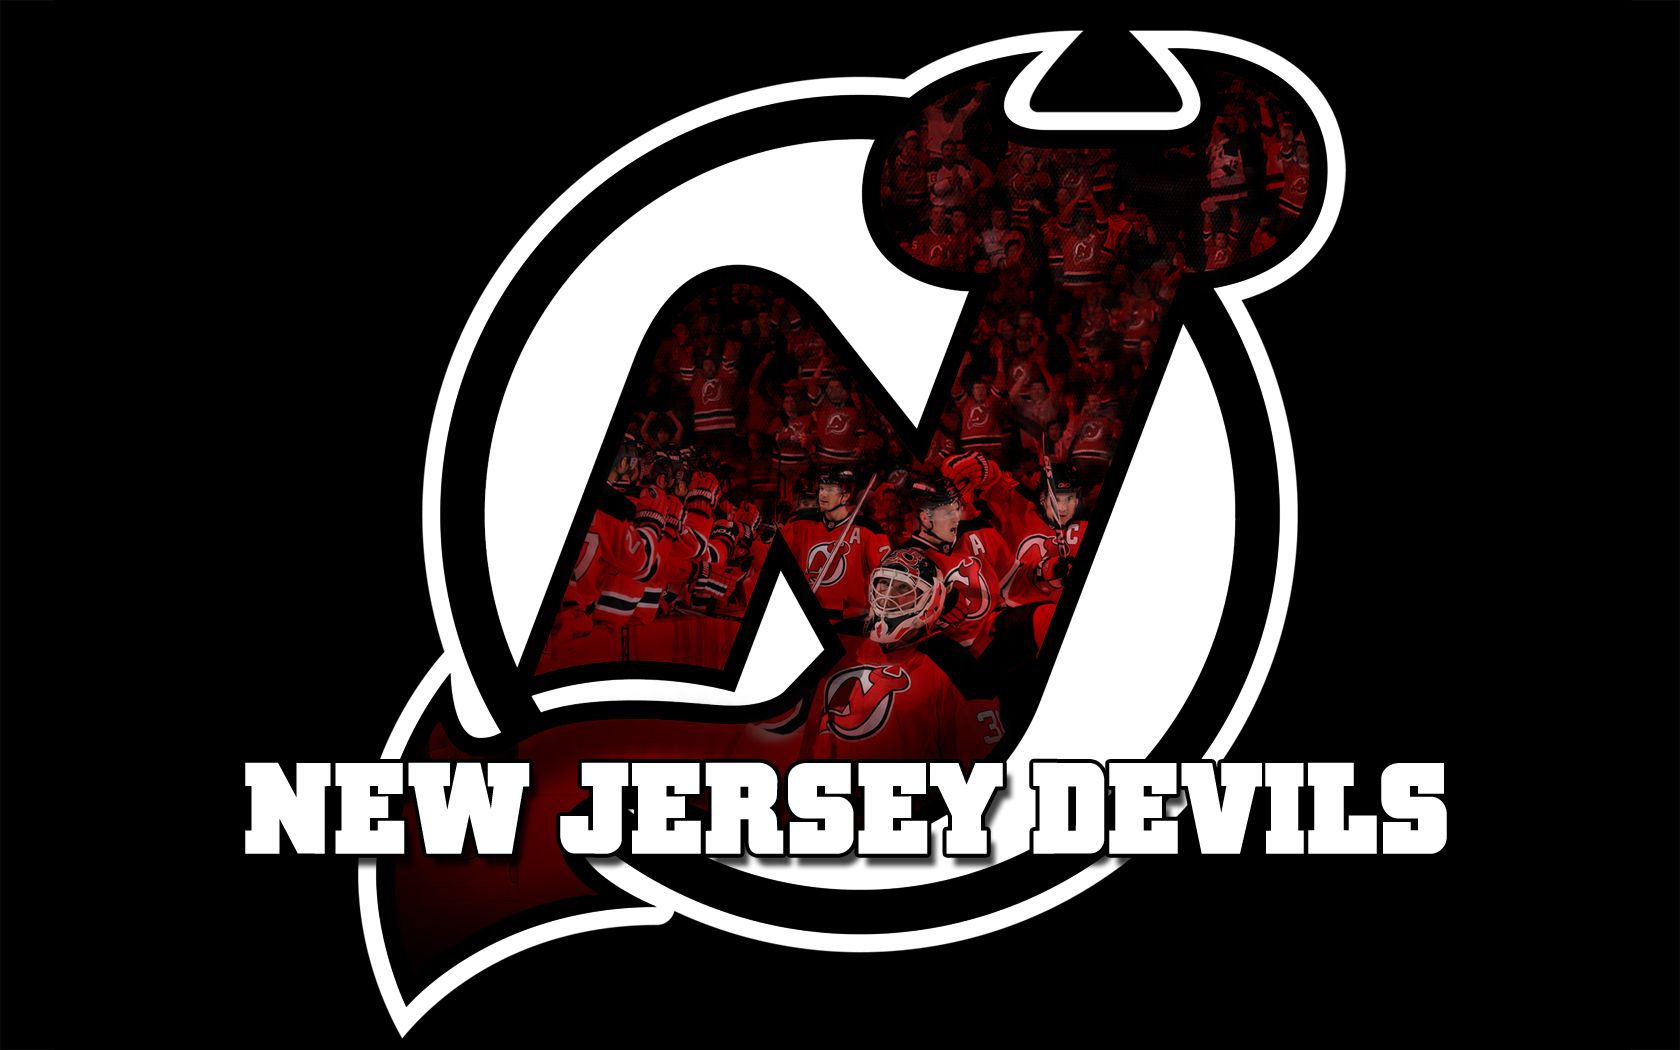 Private equity execs buy NJ Devils - Fortune